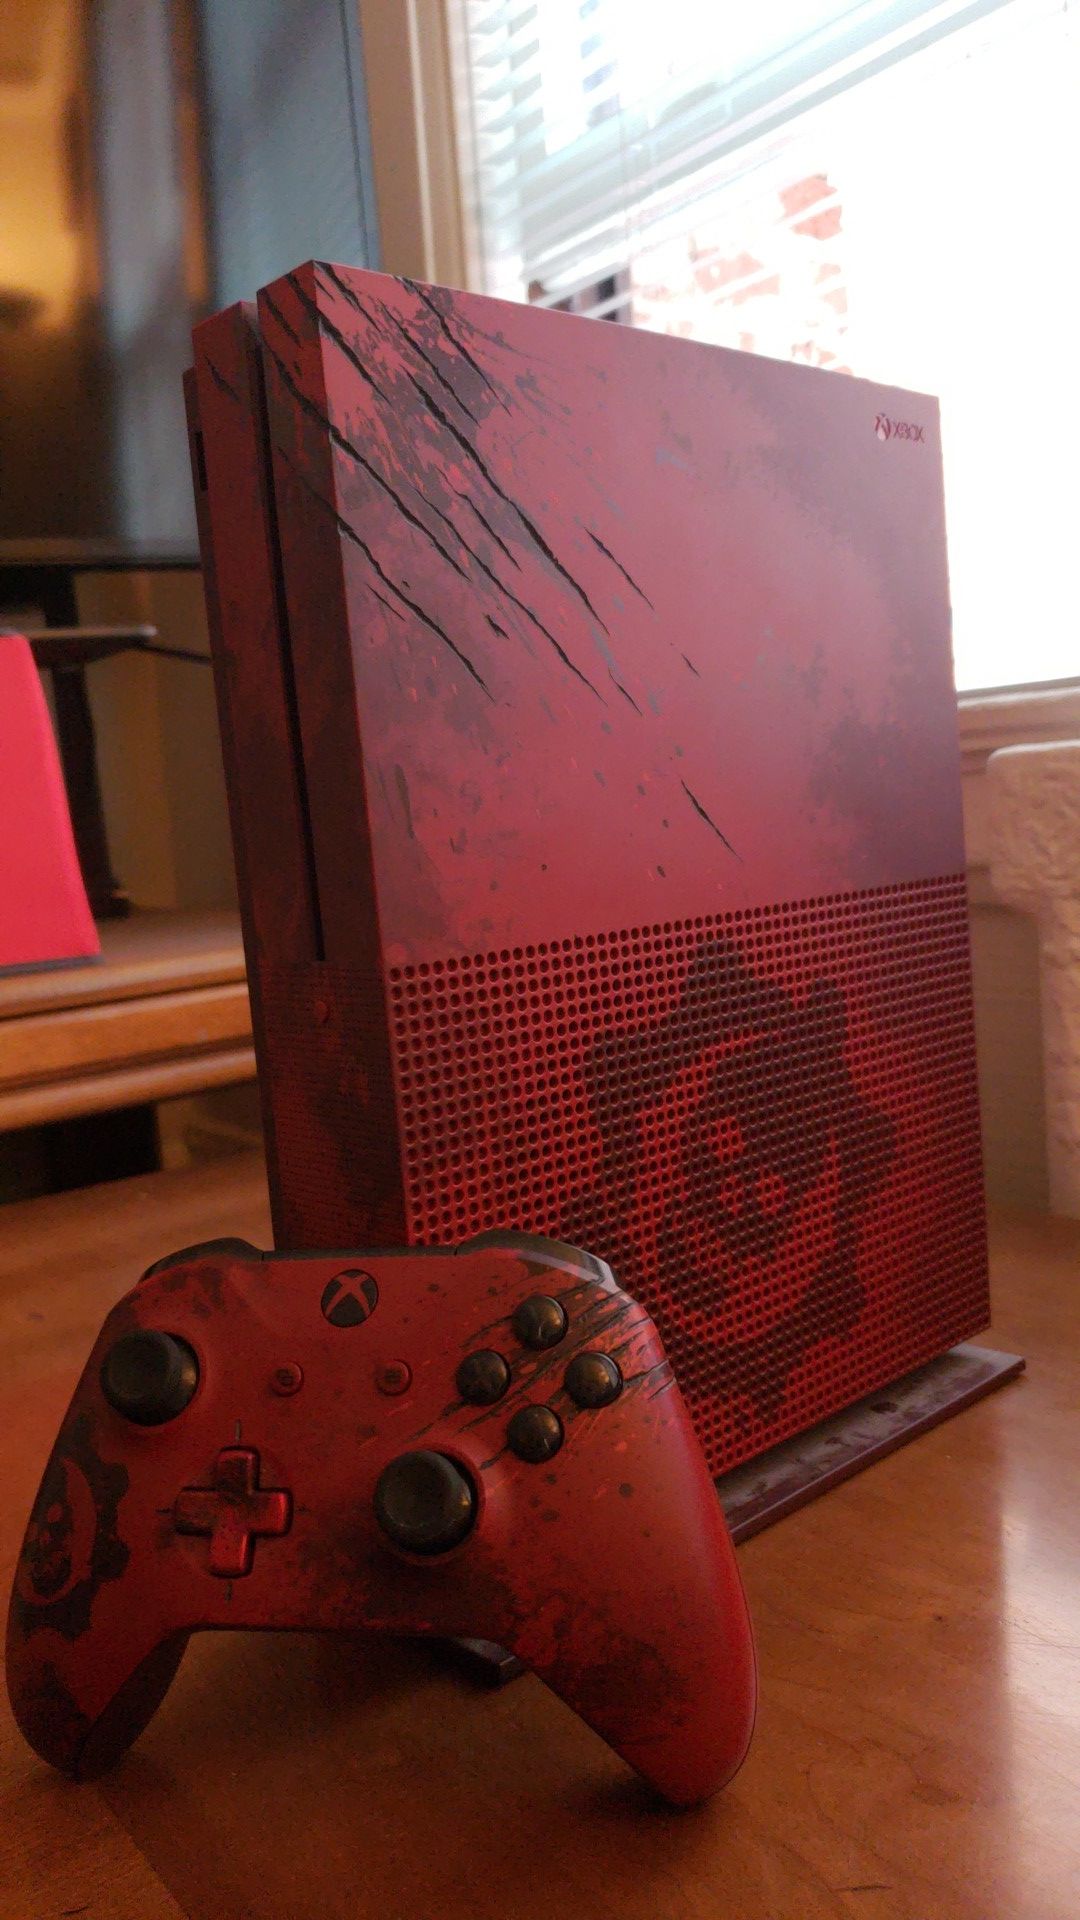 Xbox One Gears of War 4 Limited Edition console